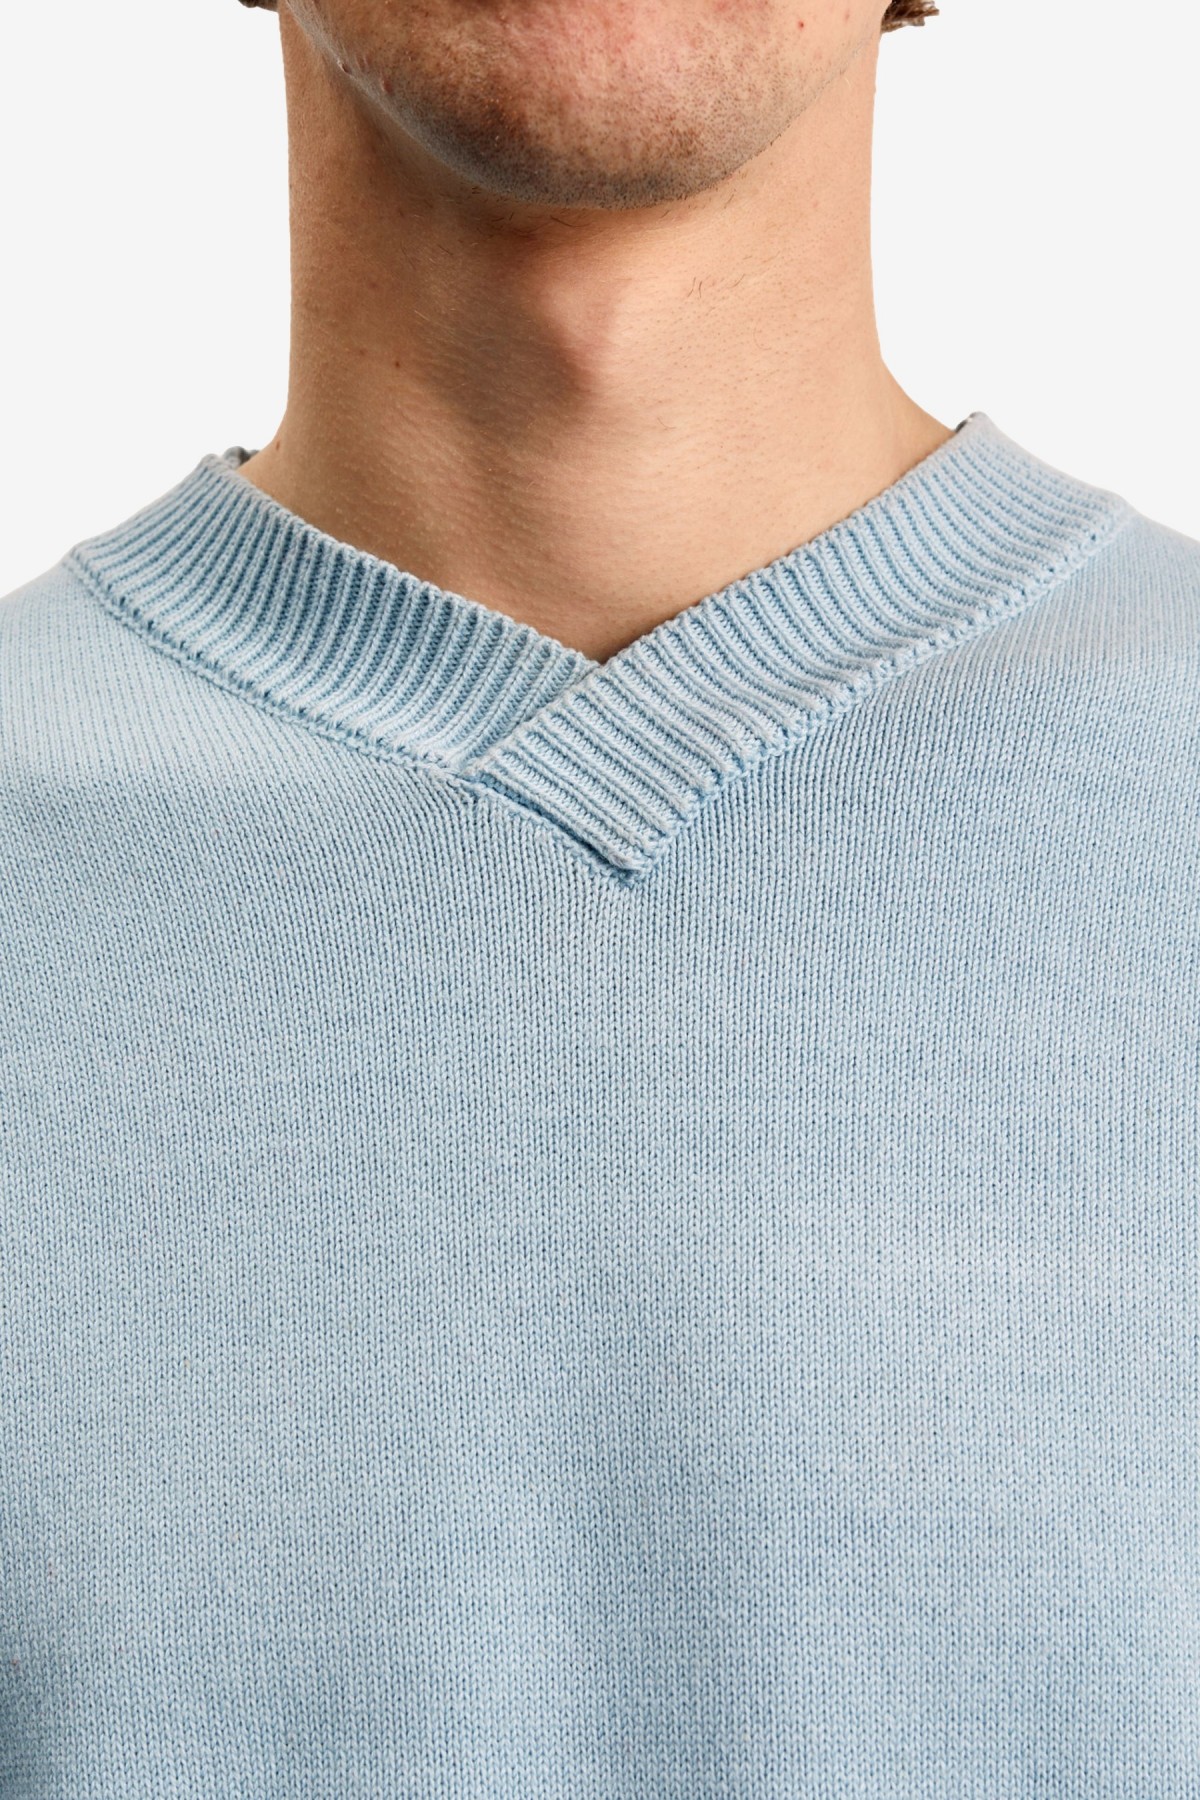 Another Aspect Sweater 3.0 in Sky Blue